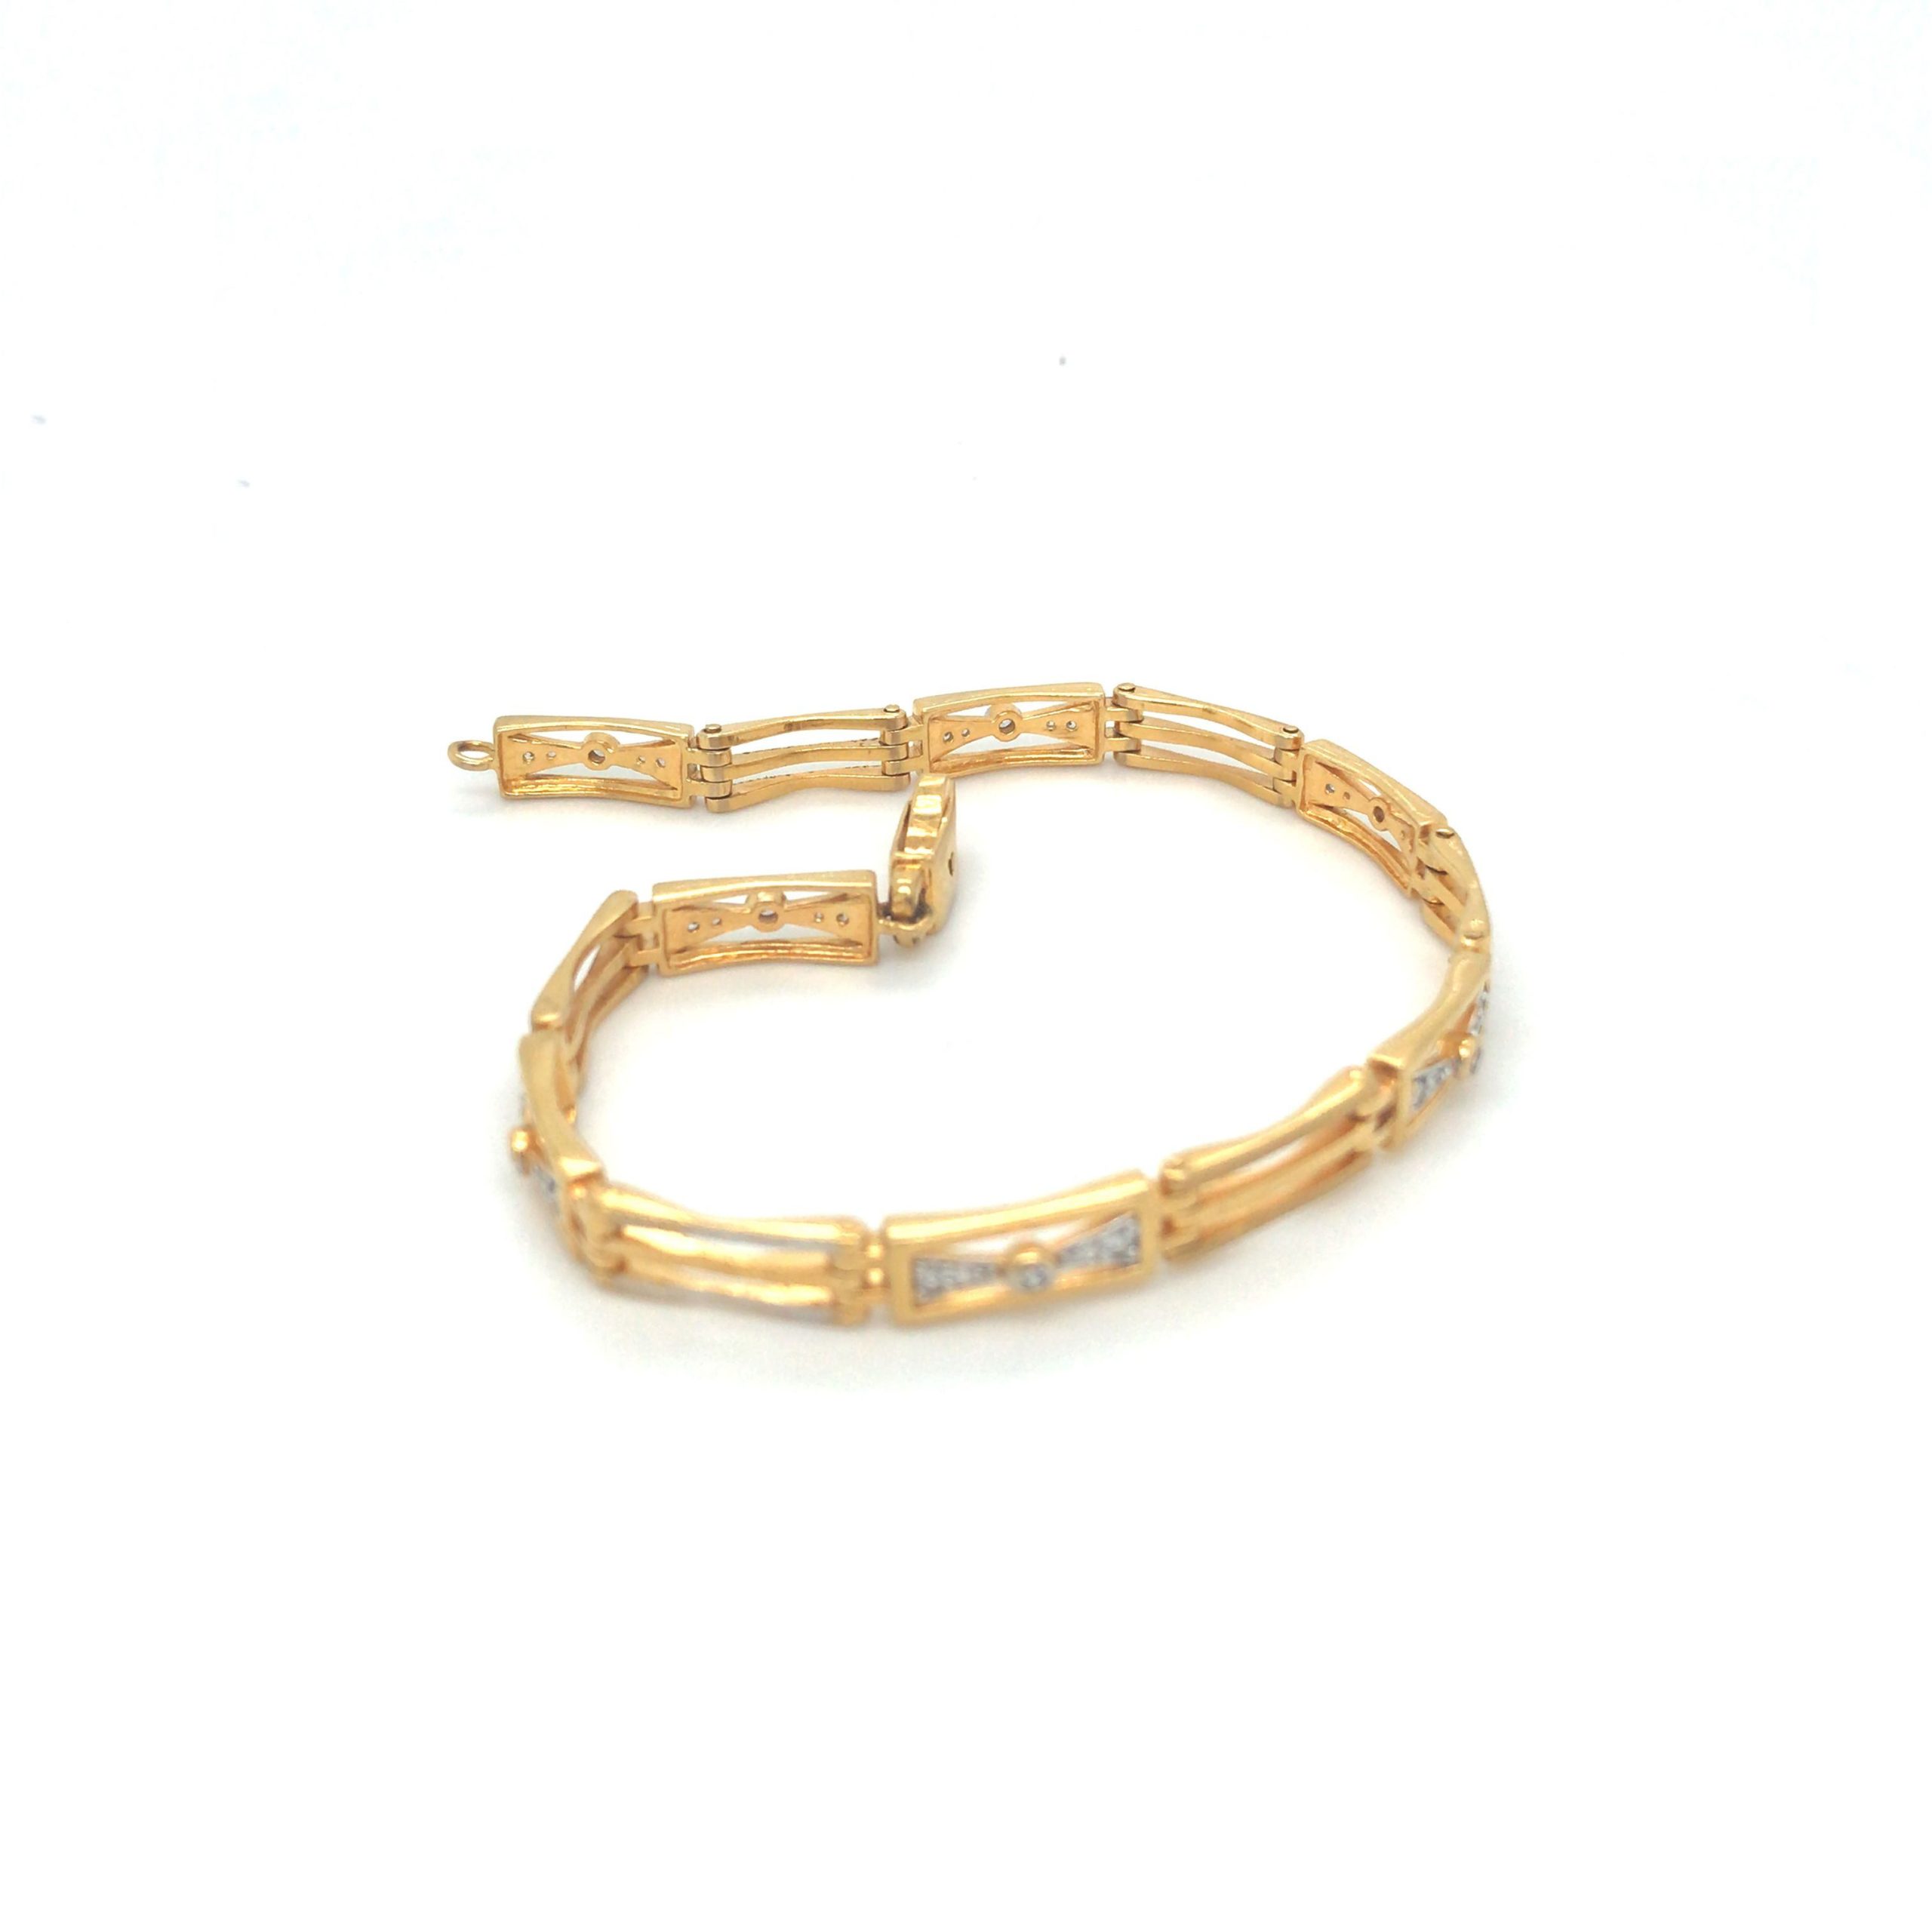 Designer Love Gold Nail Bracelet For Women And Men Stainless Steel Alloy  Armband With Diamond Bangle Bracelet Accents In Gold, Silver, And Rose From  Jewelrydesigners, $4.63 | DHgate.Com